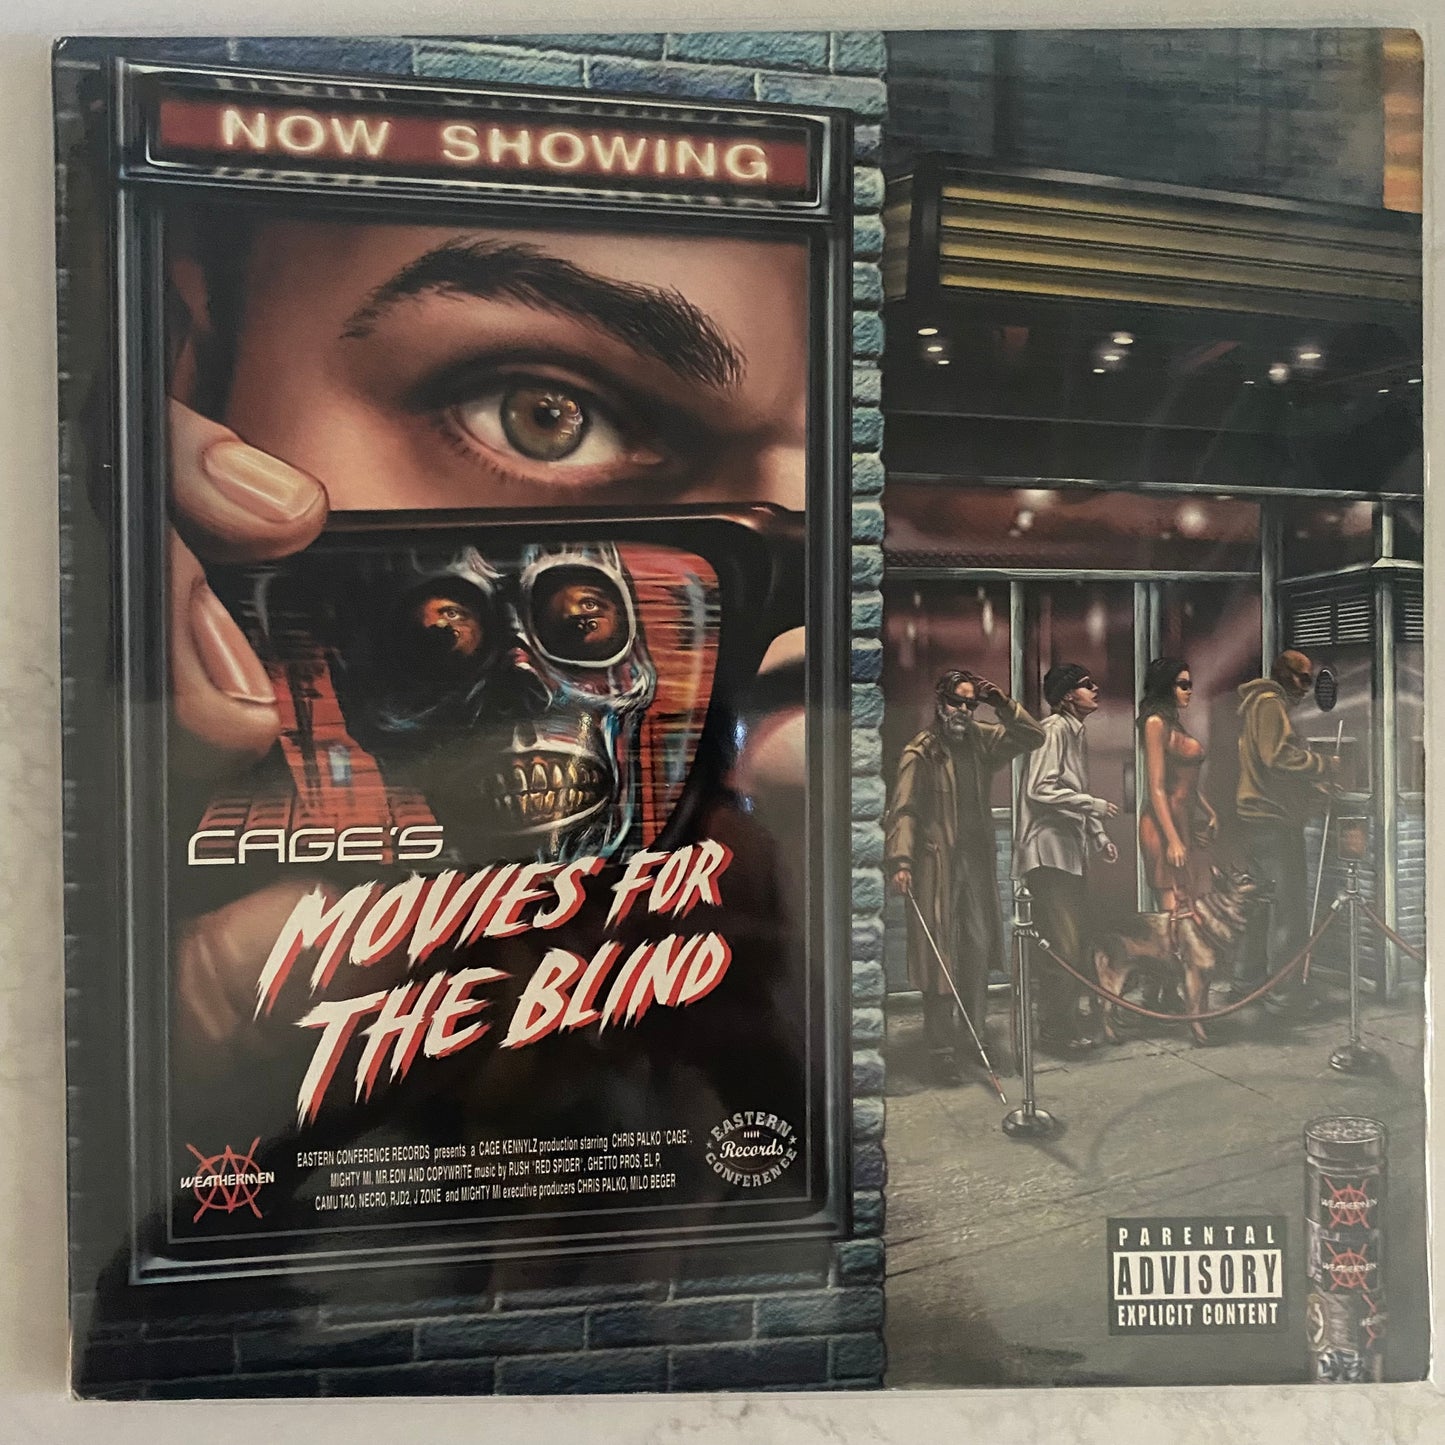 Cage - Movies For The Blind (2xLP, Album) HIP HOP